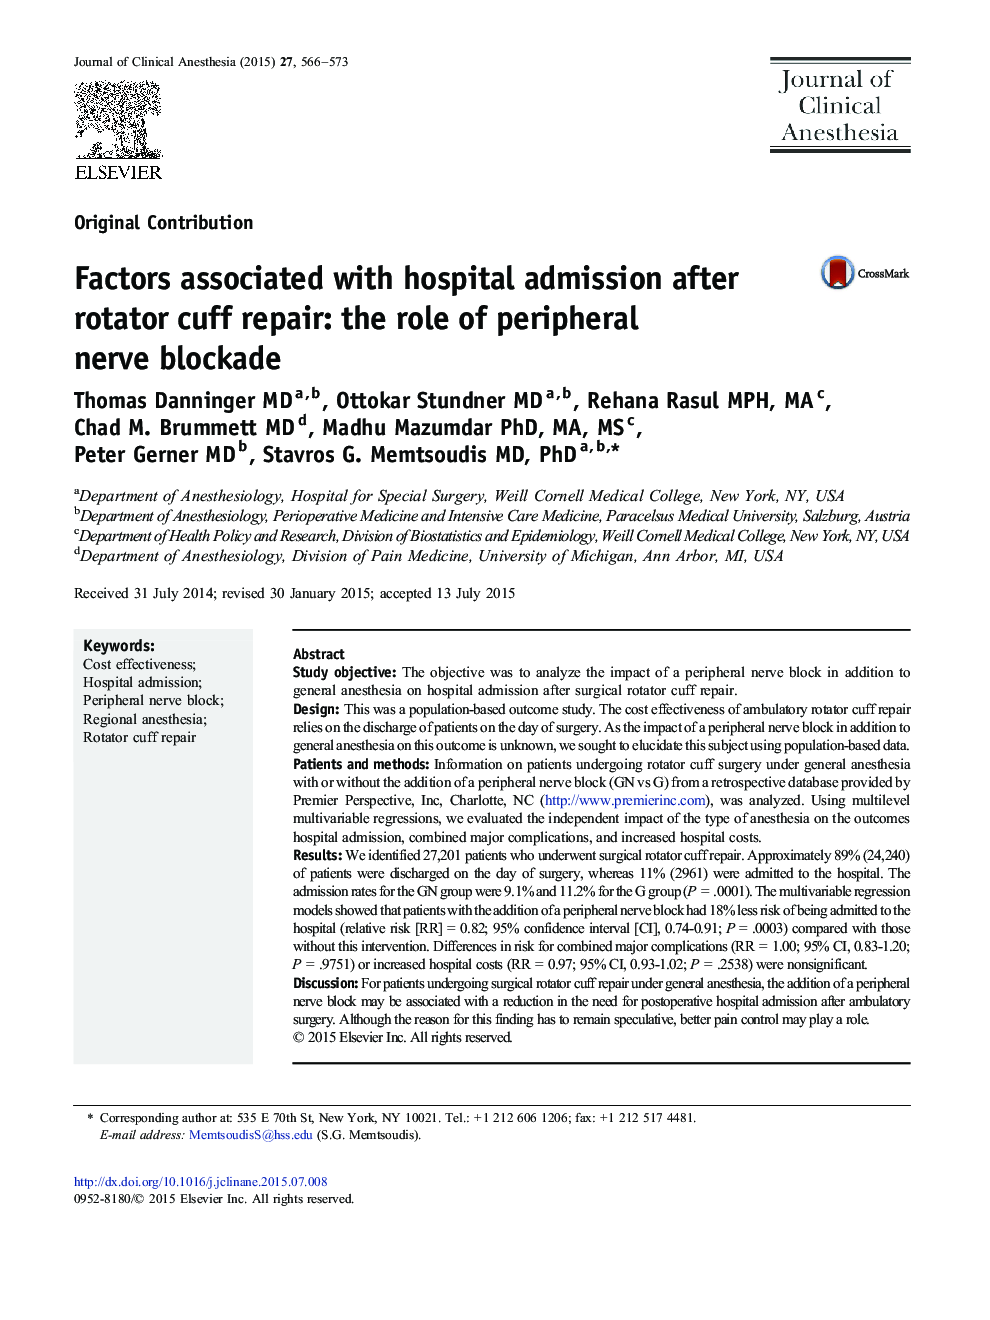 Factors associated with hospital admission after rotator cuff repair: the role of peripheral nerve blockade